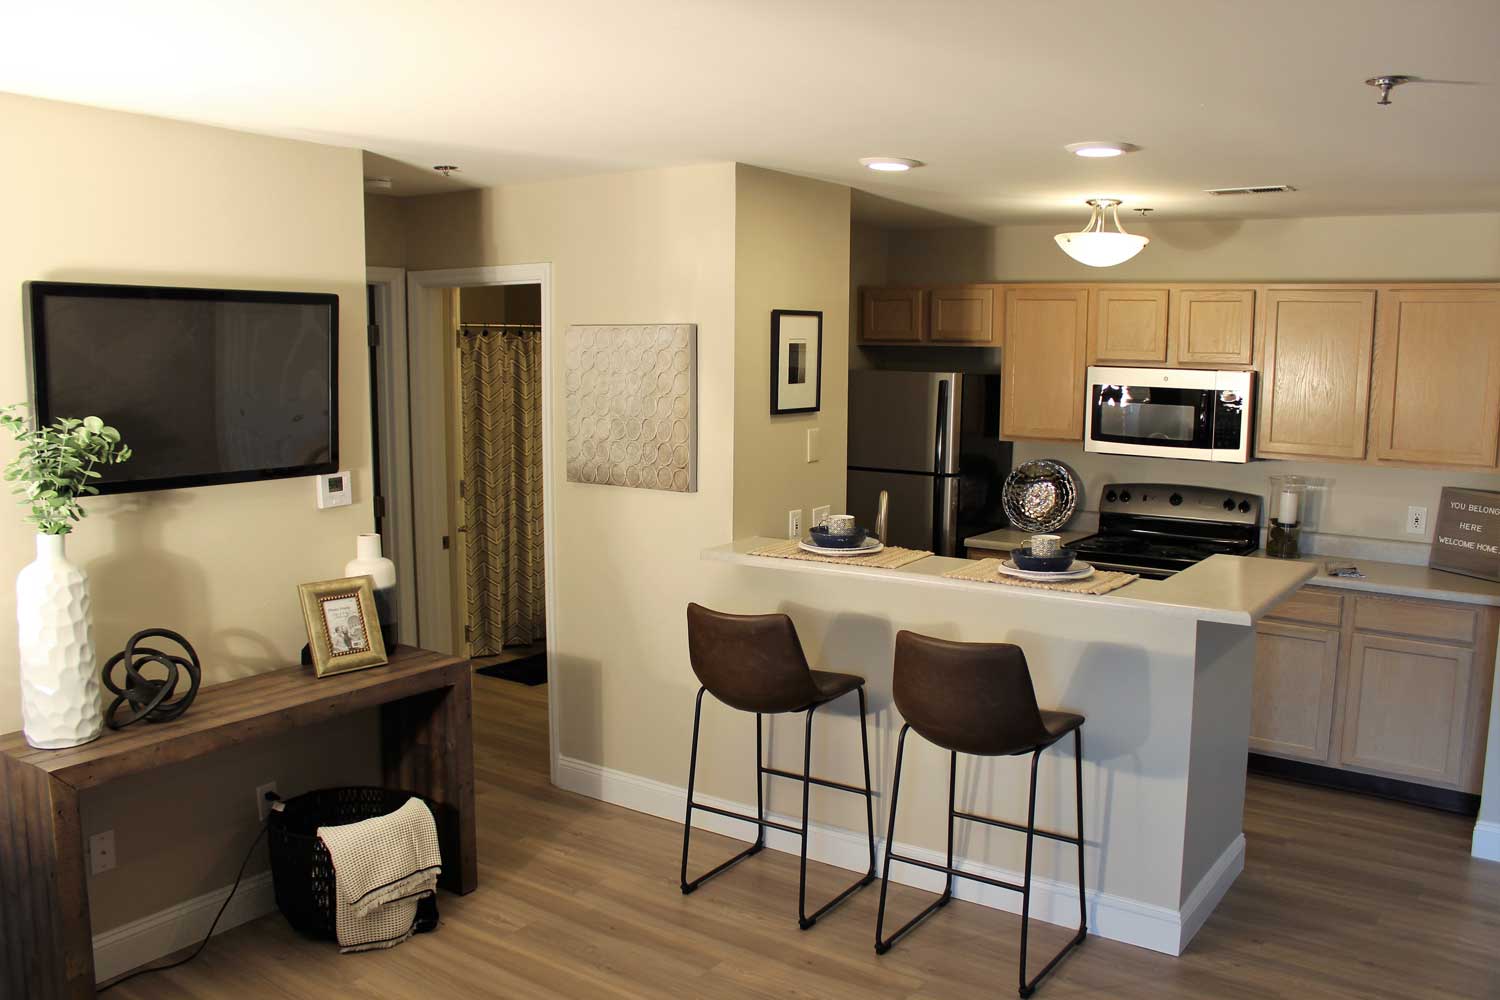 In-Kitchen Dining Area at Polo Downs Apartments in Fenton, MO